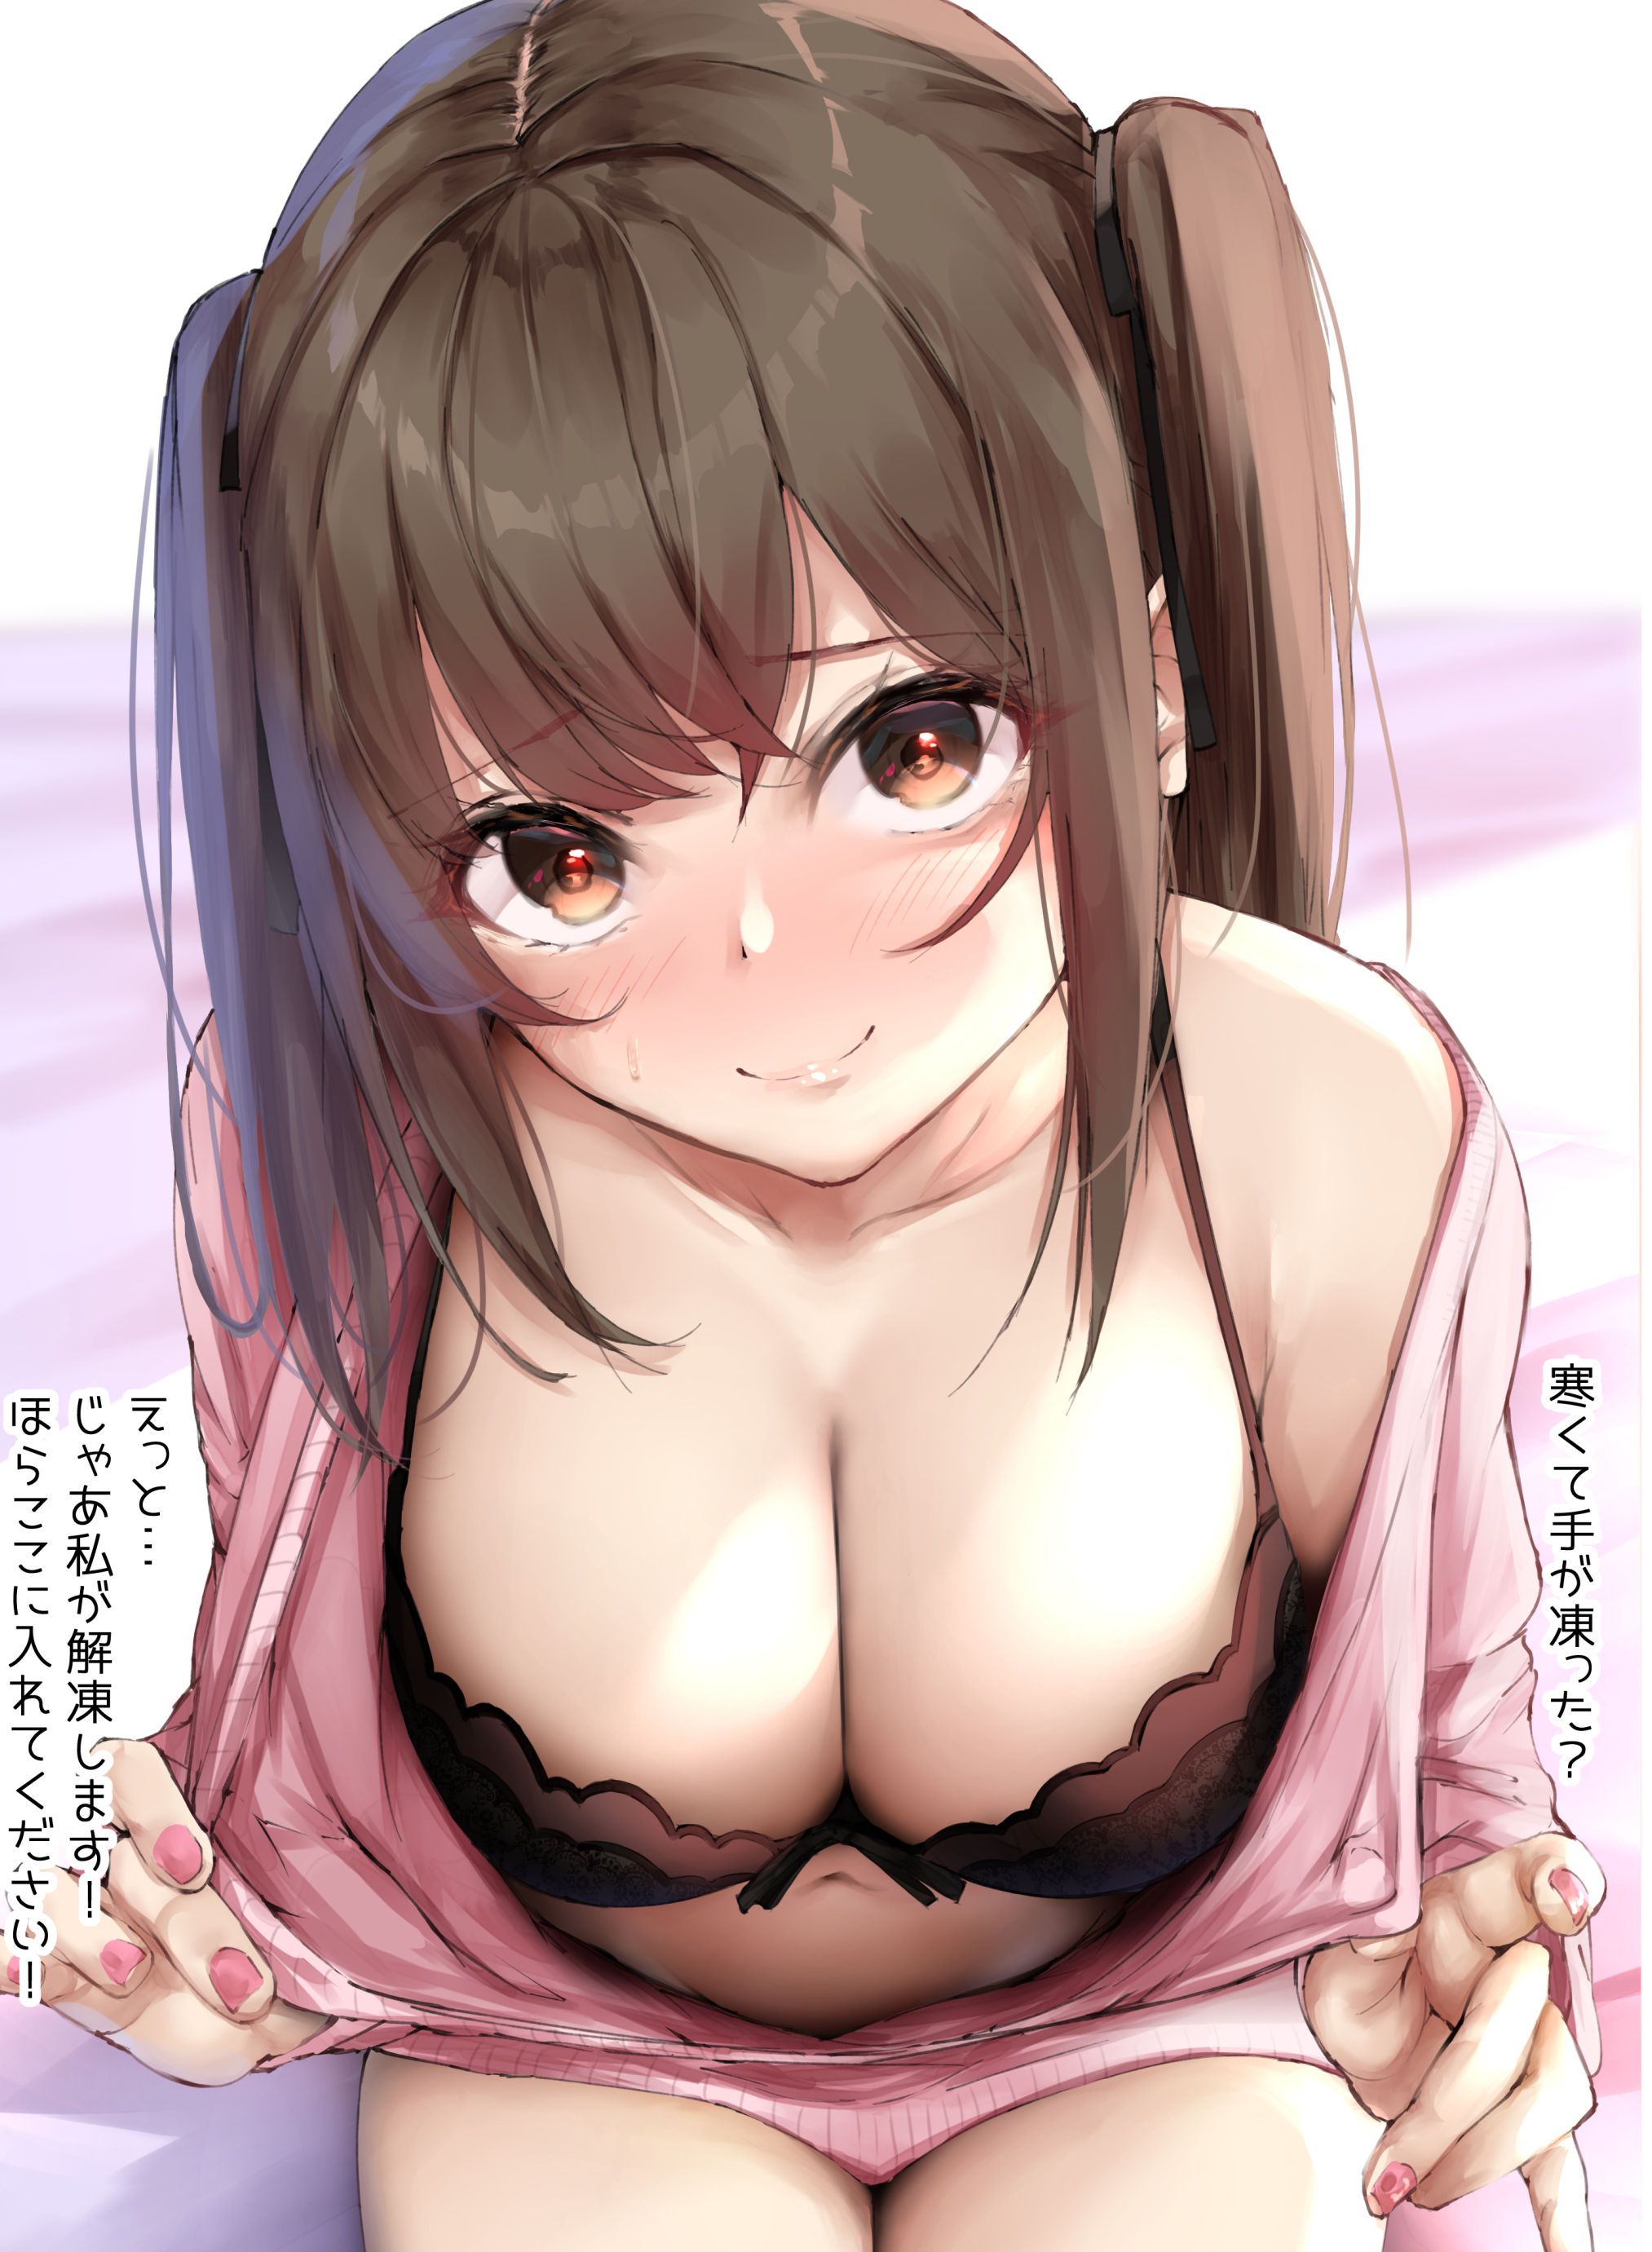 Anime 2026x2762 Fay (artist) anime girls boobs big boobs cleavage bra pulling clothing blushing brunette twintails brown eyes